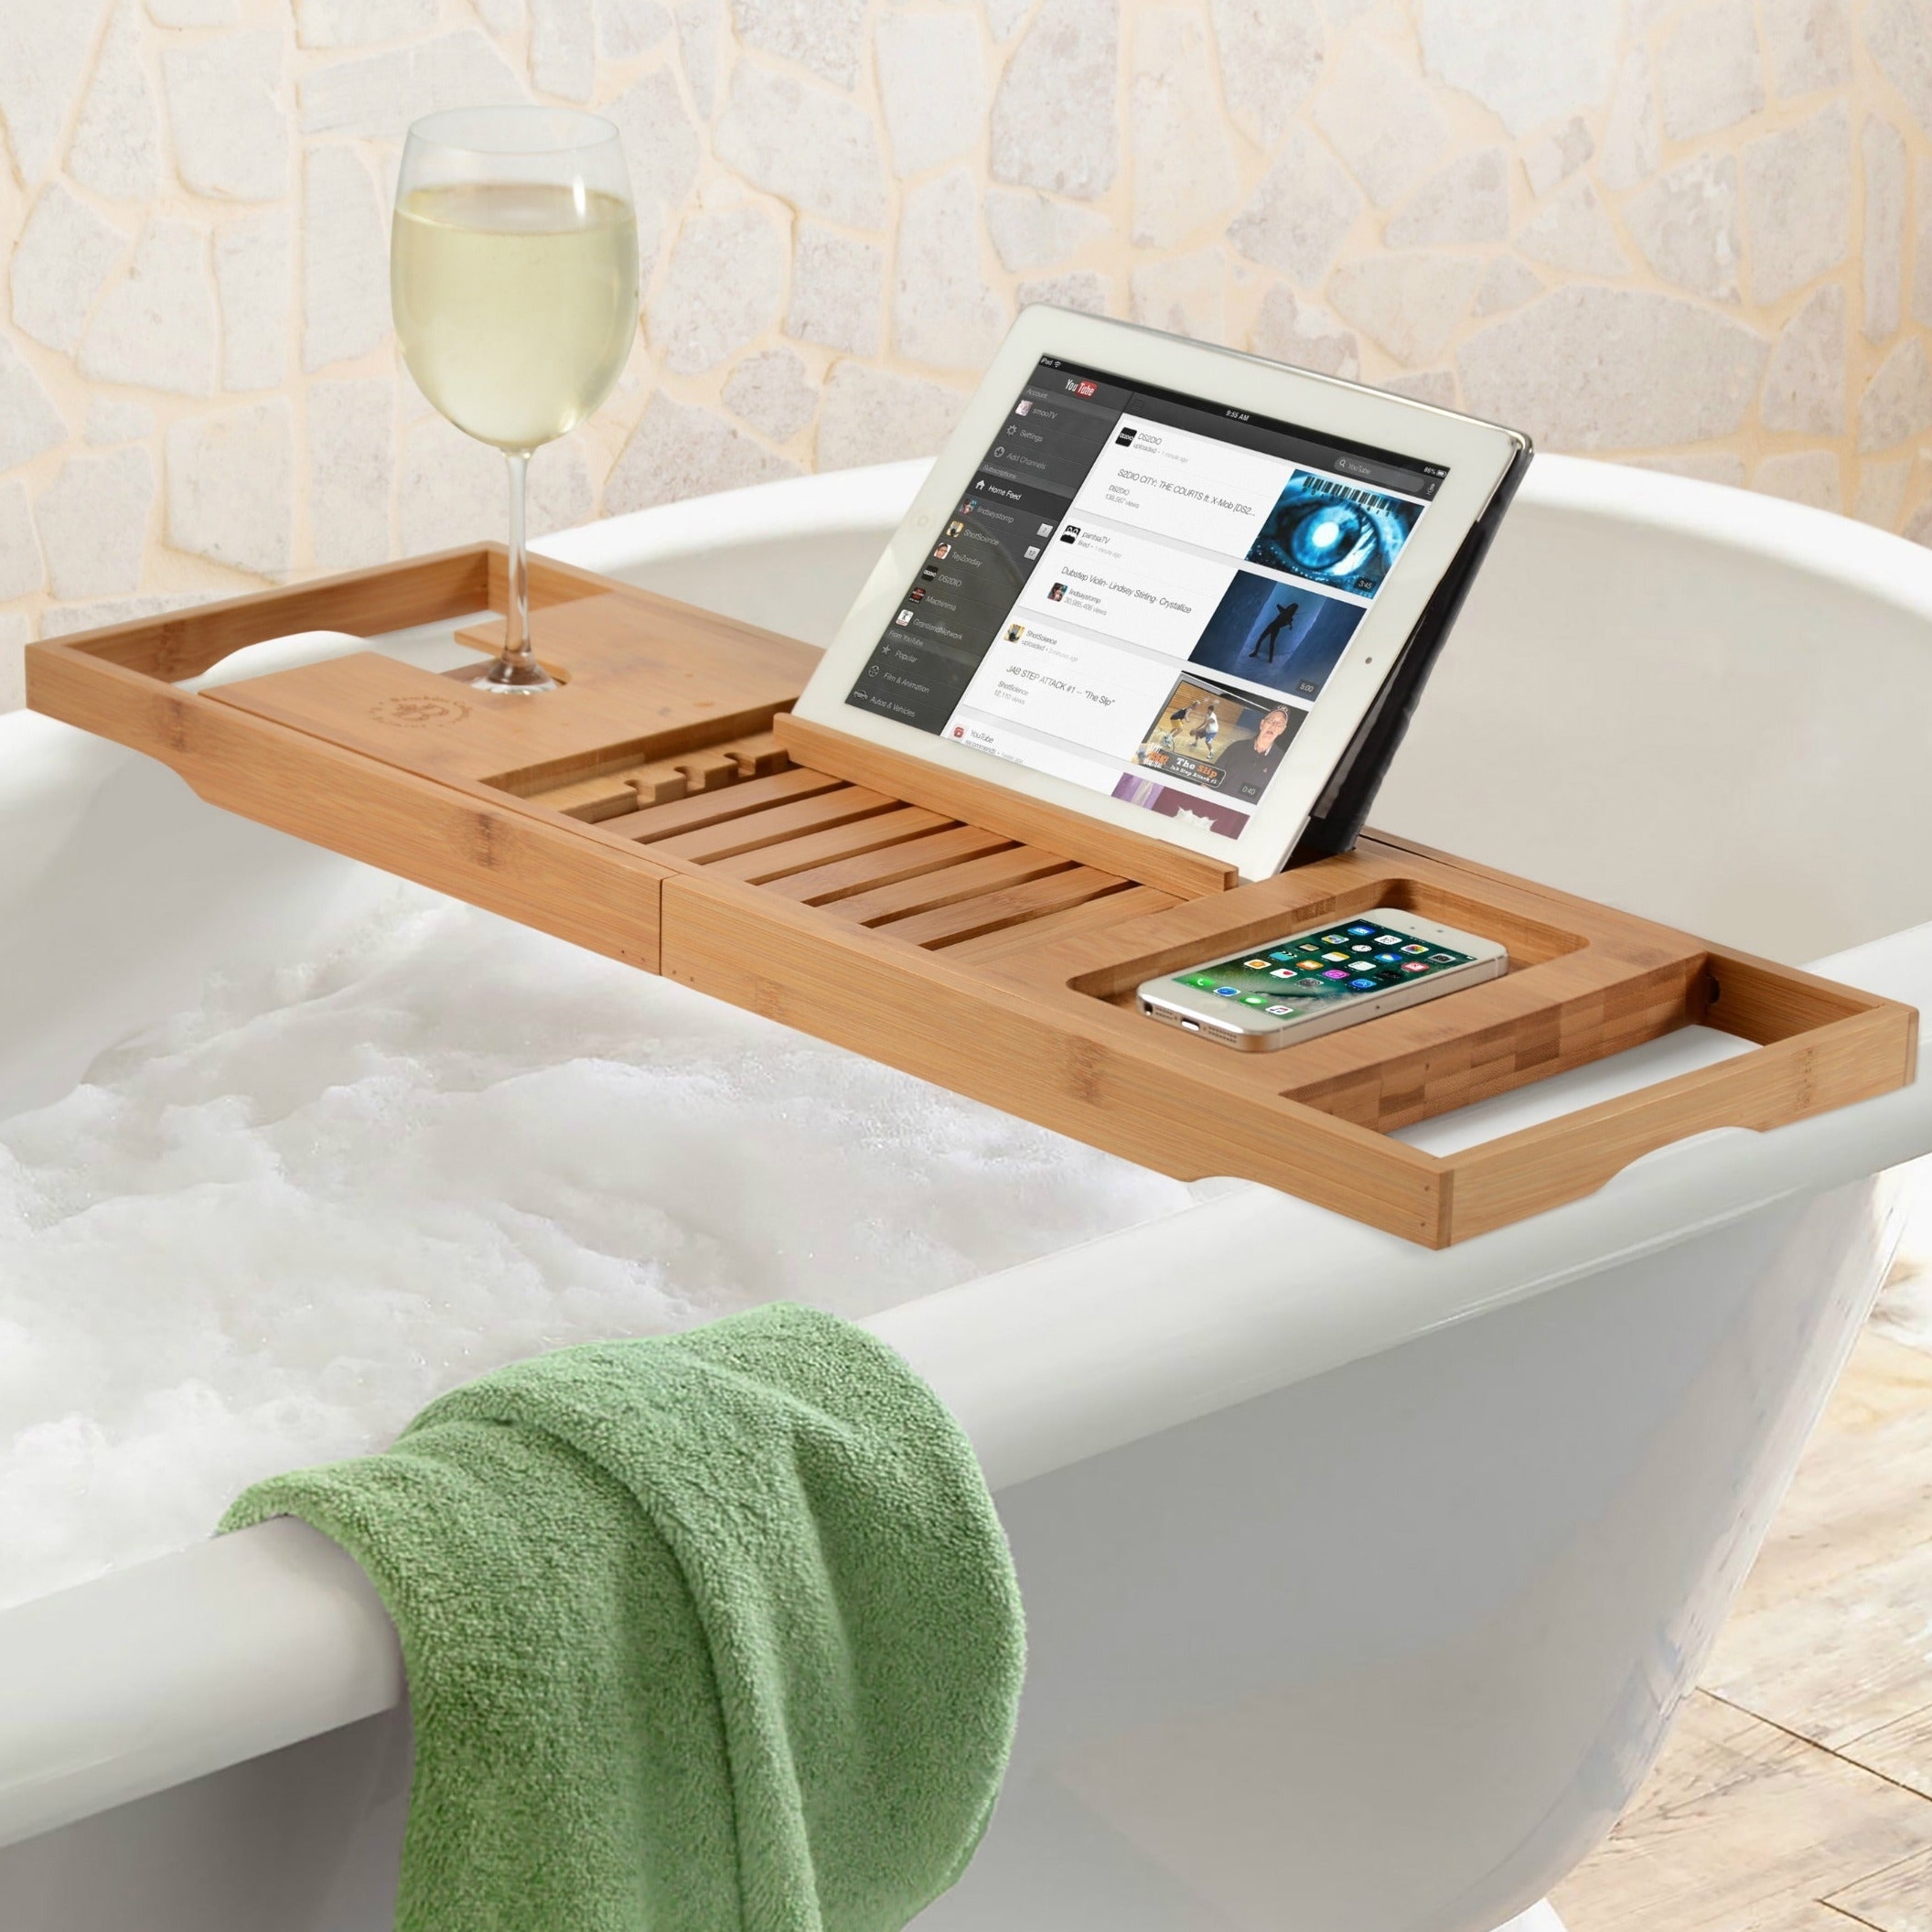 Bambüsi 100% Bamboo Bathtub Caddy with Extending Sides, Reading Rack, Cellphone Tray & Integrated Wine Glass Holder